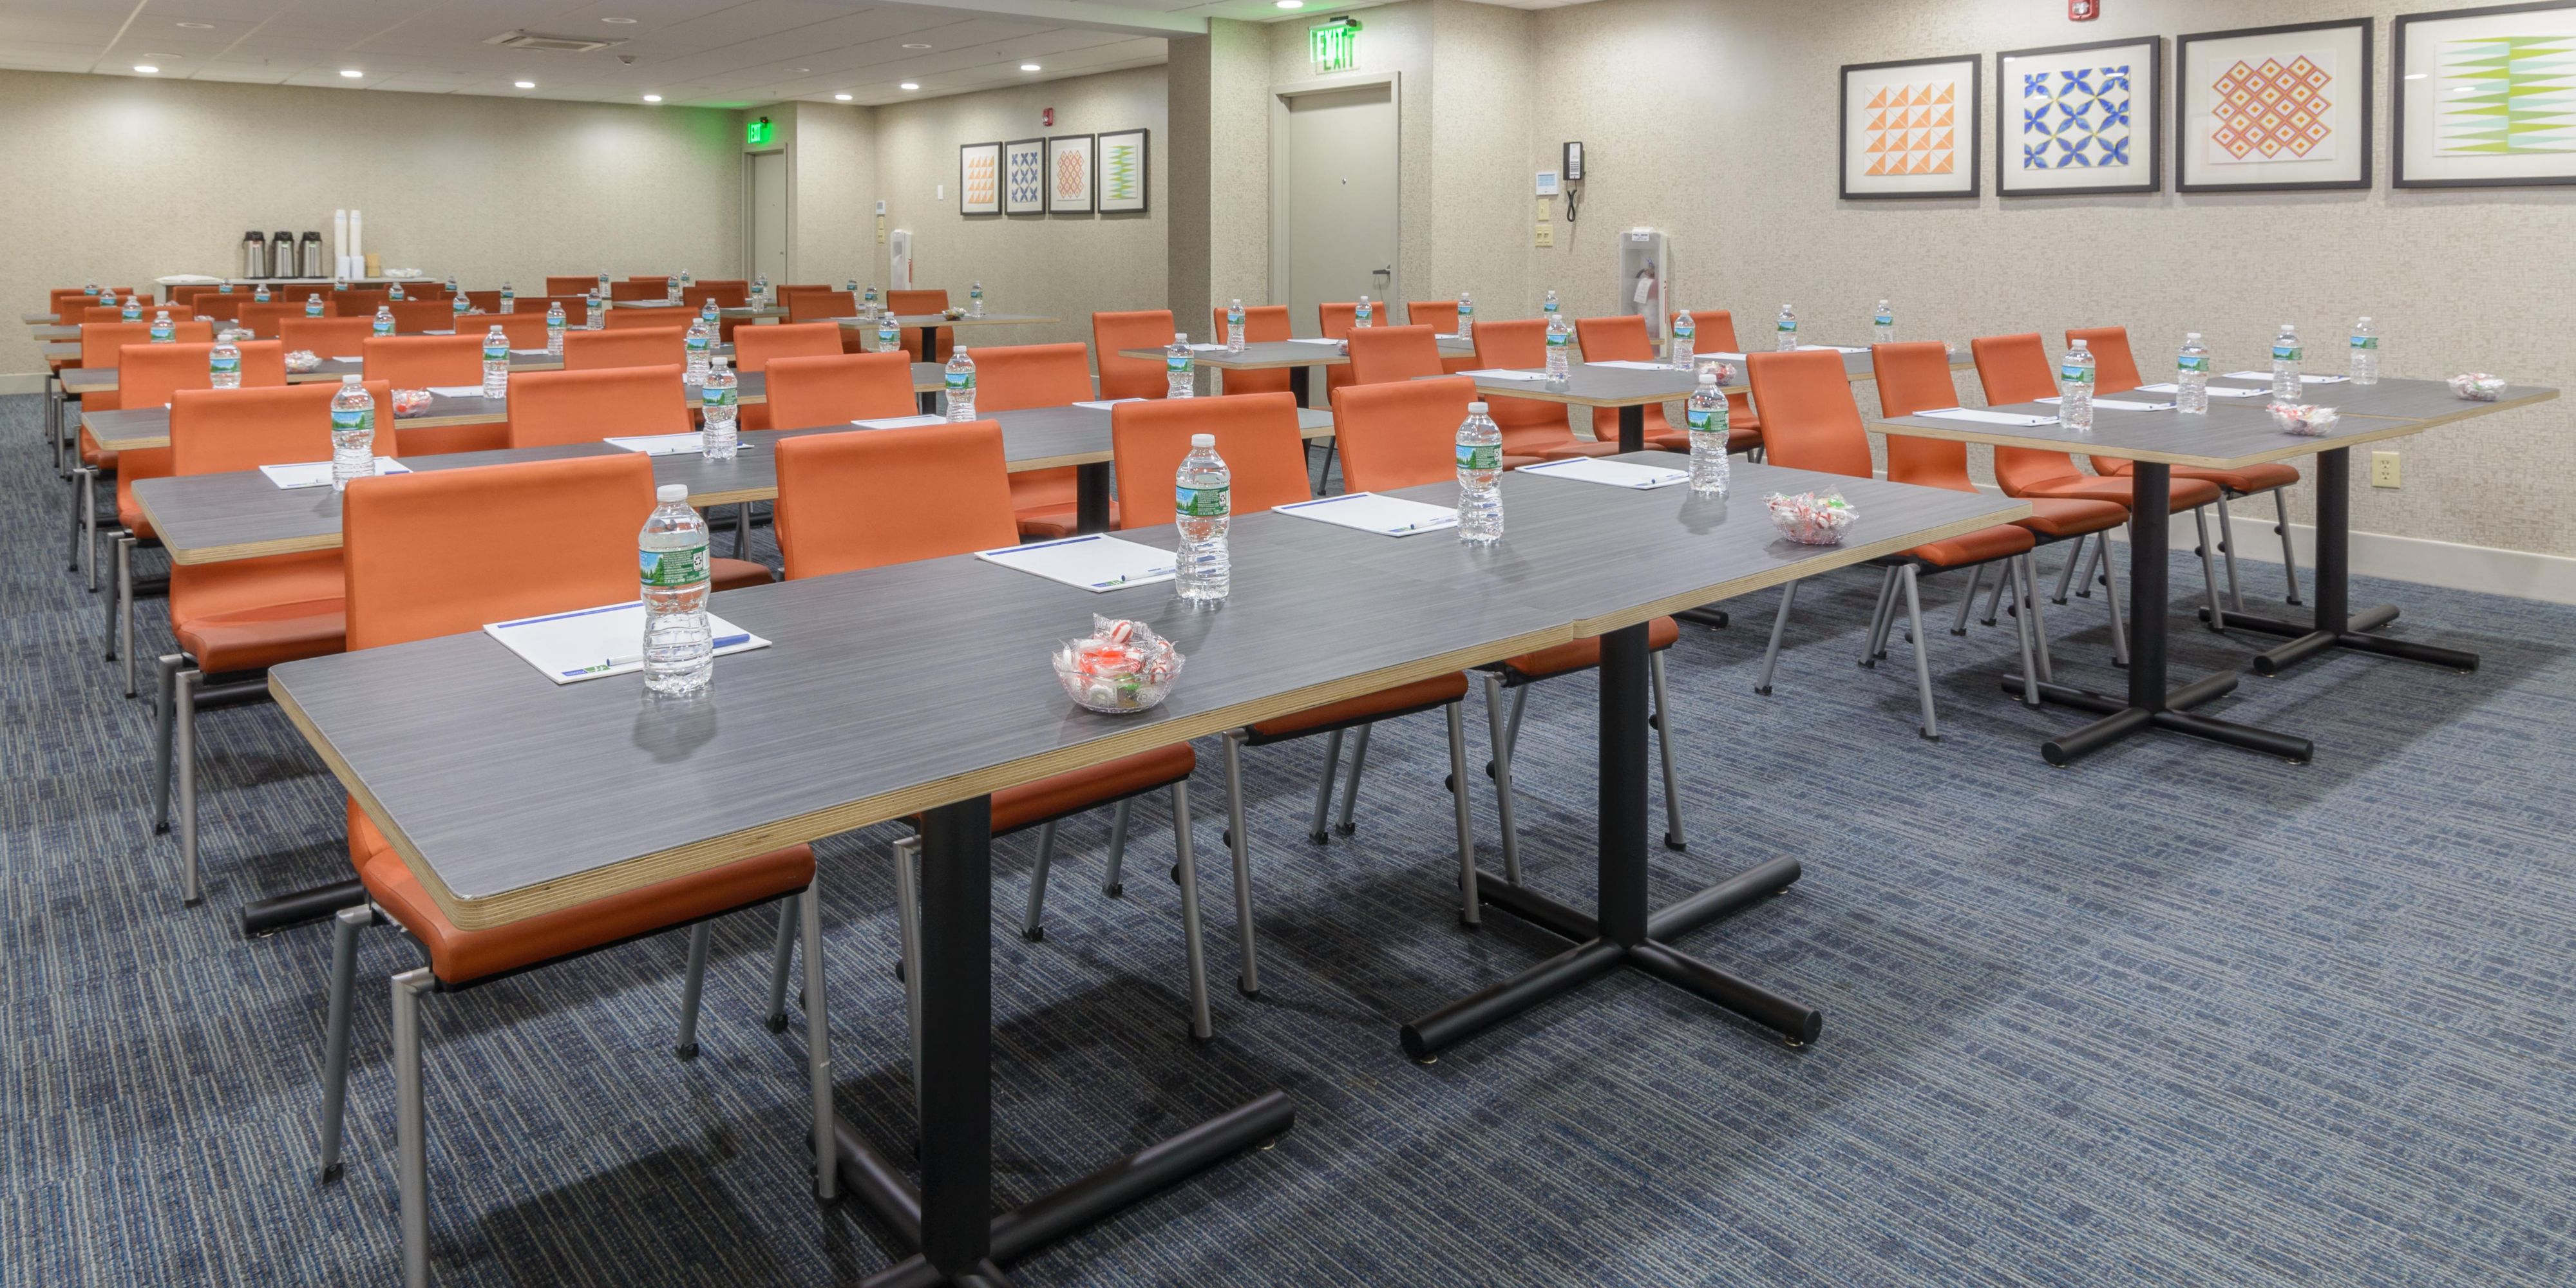 We offer two flexible meeting rooms that can accommodate up to 80 people and many different room configurations. All rooms have free high-speed internet access and located on the first floor.